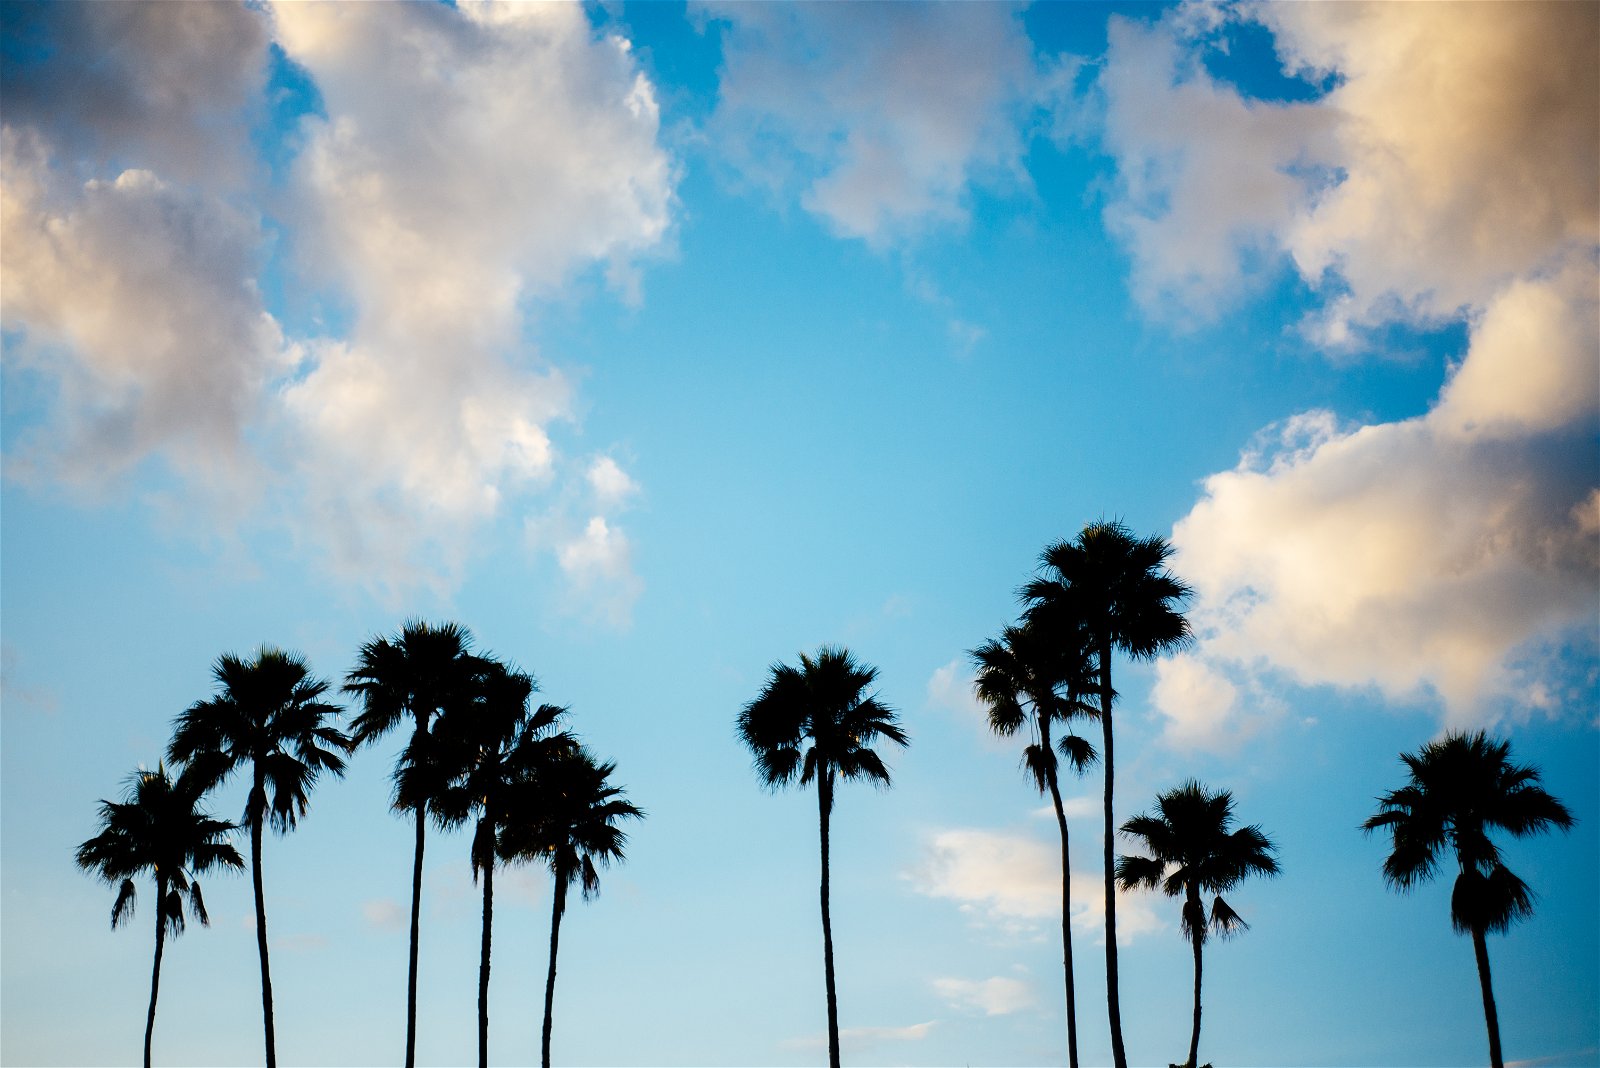 Silhouettes of palm trees against a blue sky and clouds at sunset